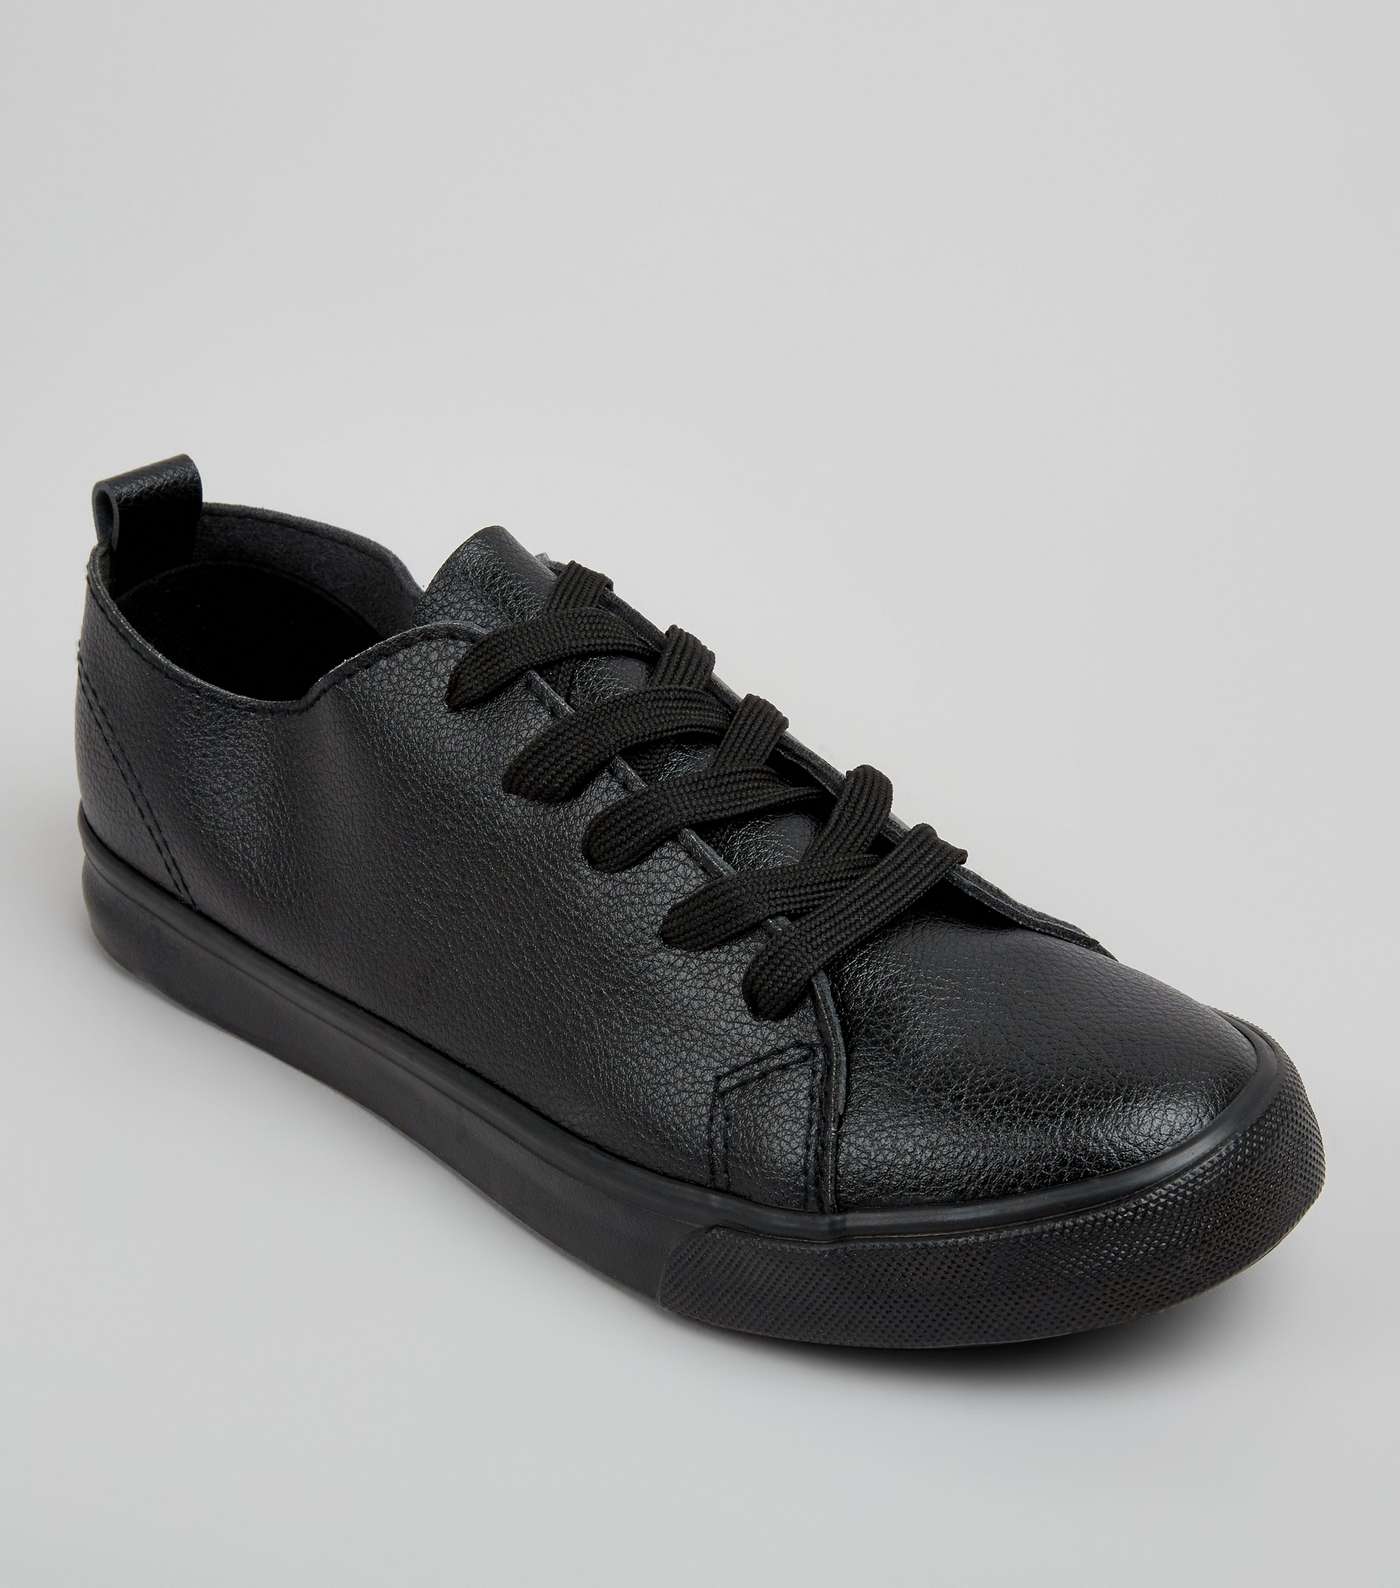 Black Lace Up Trainers